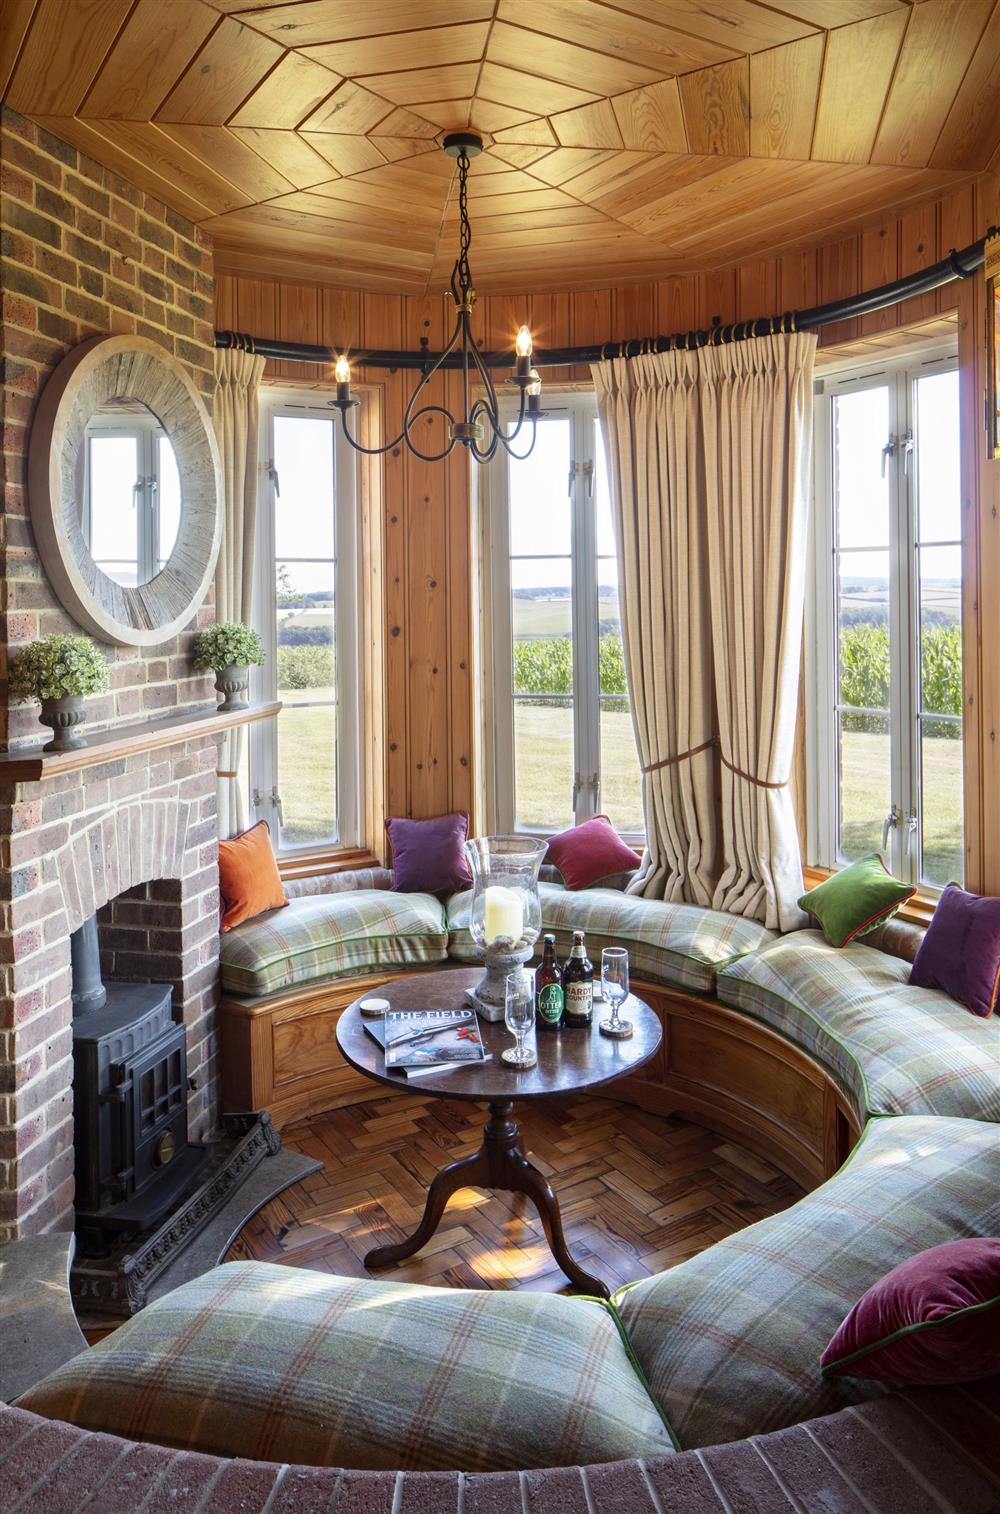 The unique Turret with its cosy seating at The Shooting Lodge, Dorset